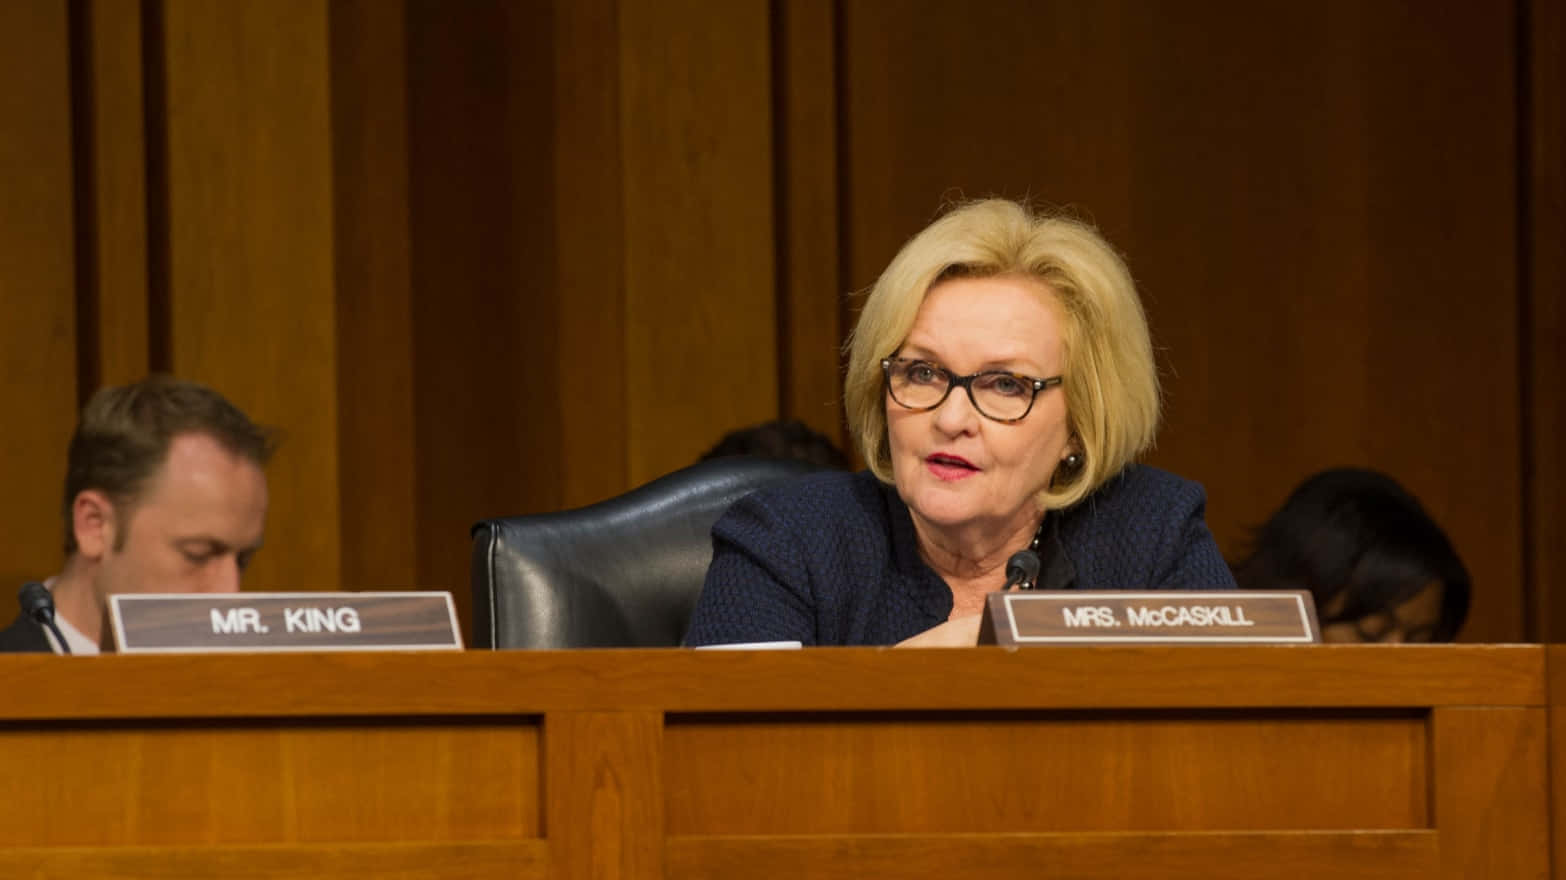 Claire Mccaskill Speaking During Hearing Wallpaper